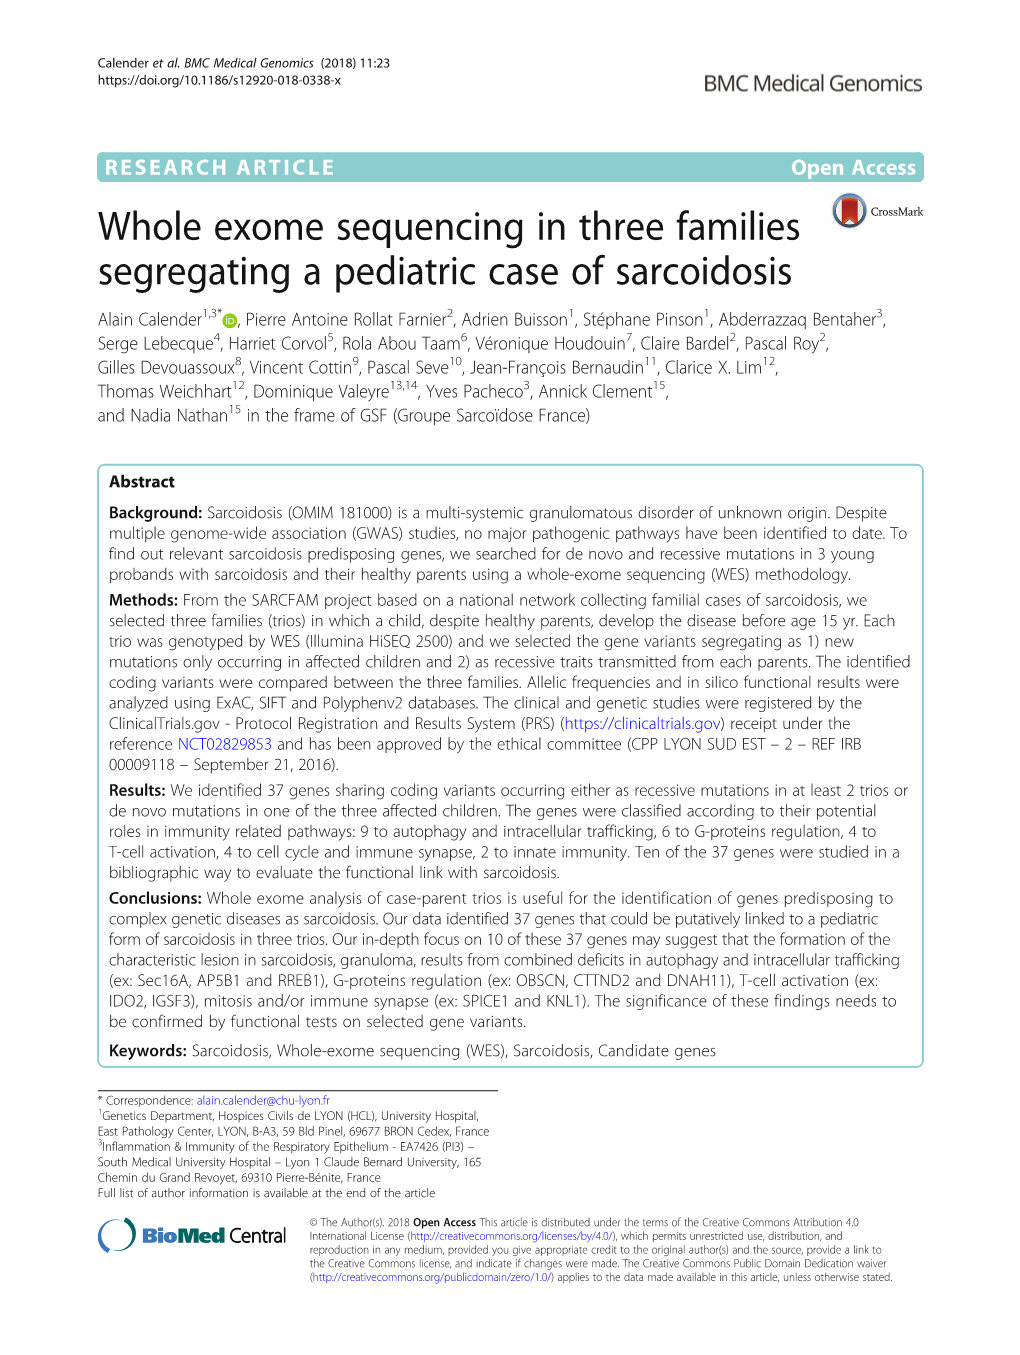 Whole Exome Sequencing in Three Families Segregating a Pediatric Case of Sarcoidosis